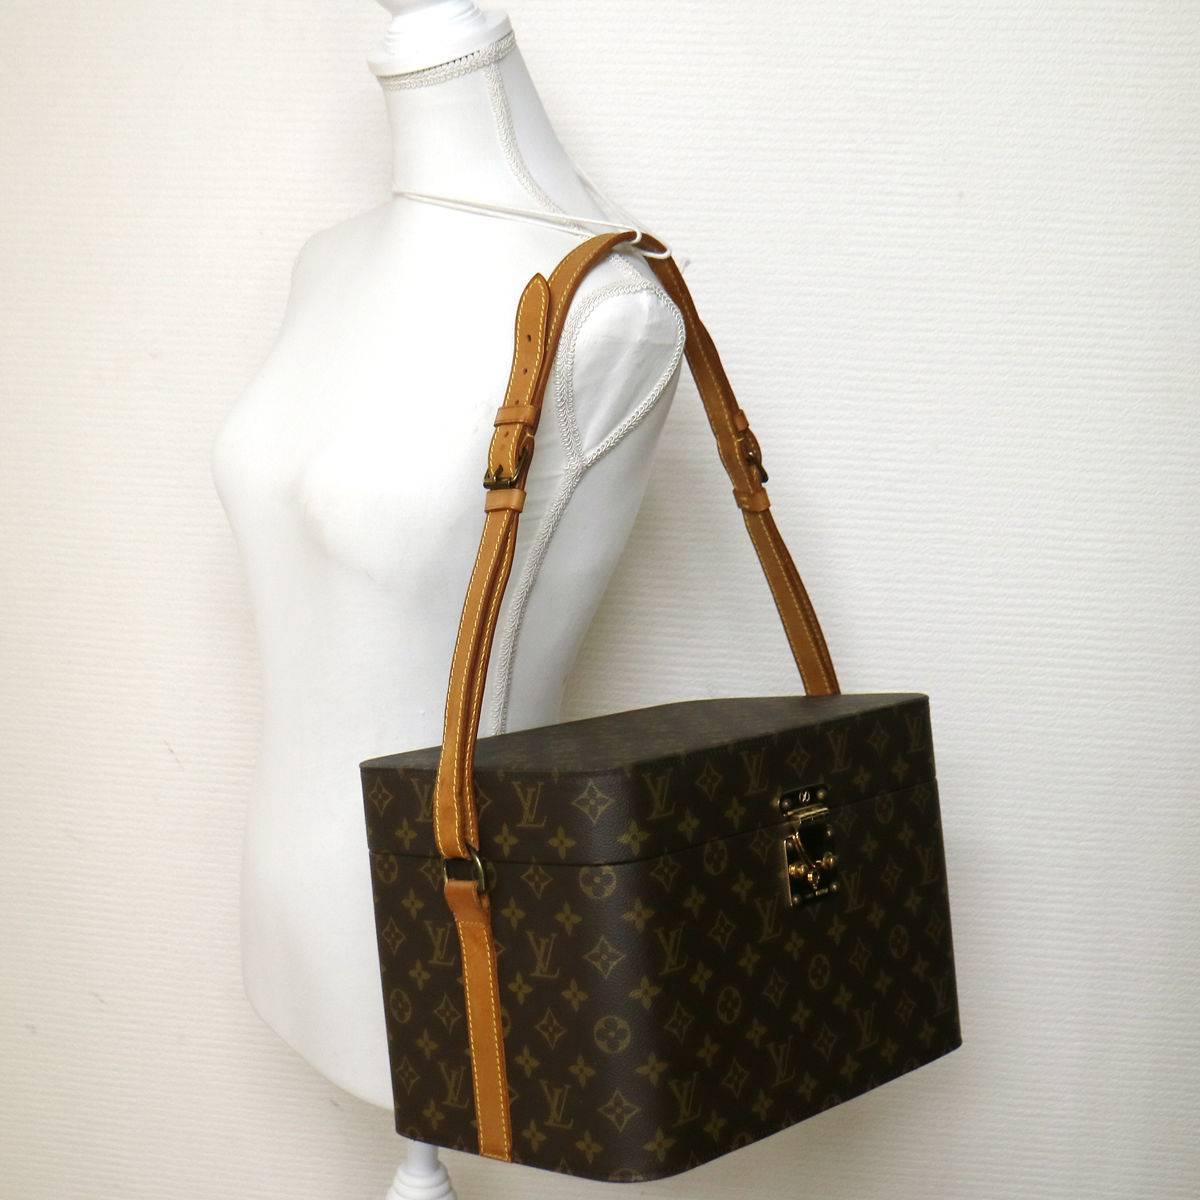 CURATOR'S NOTES

Absolutely stunning and well-preserved rare Louis Vuitton carryon vanity shoulder bag case. Perfect for your jewelry, perfume/cologne and special items while traveling. 

This beauty is substantial in size and weight--the pictures